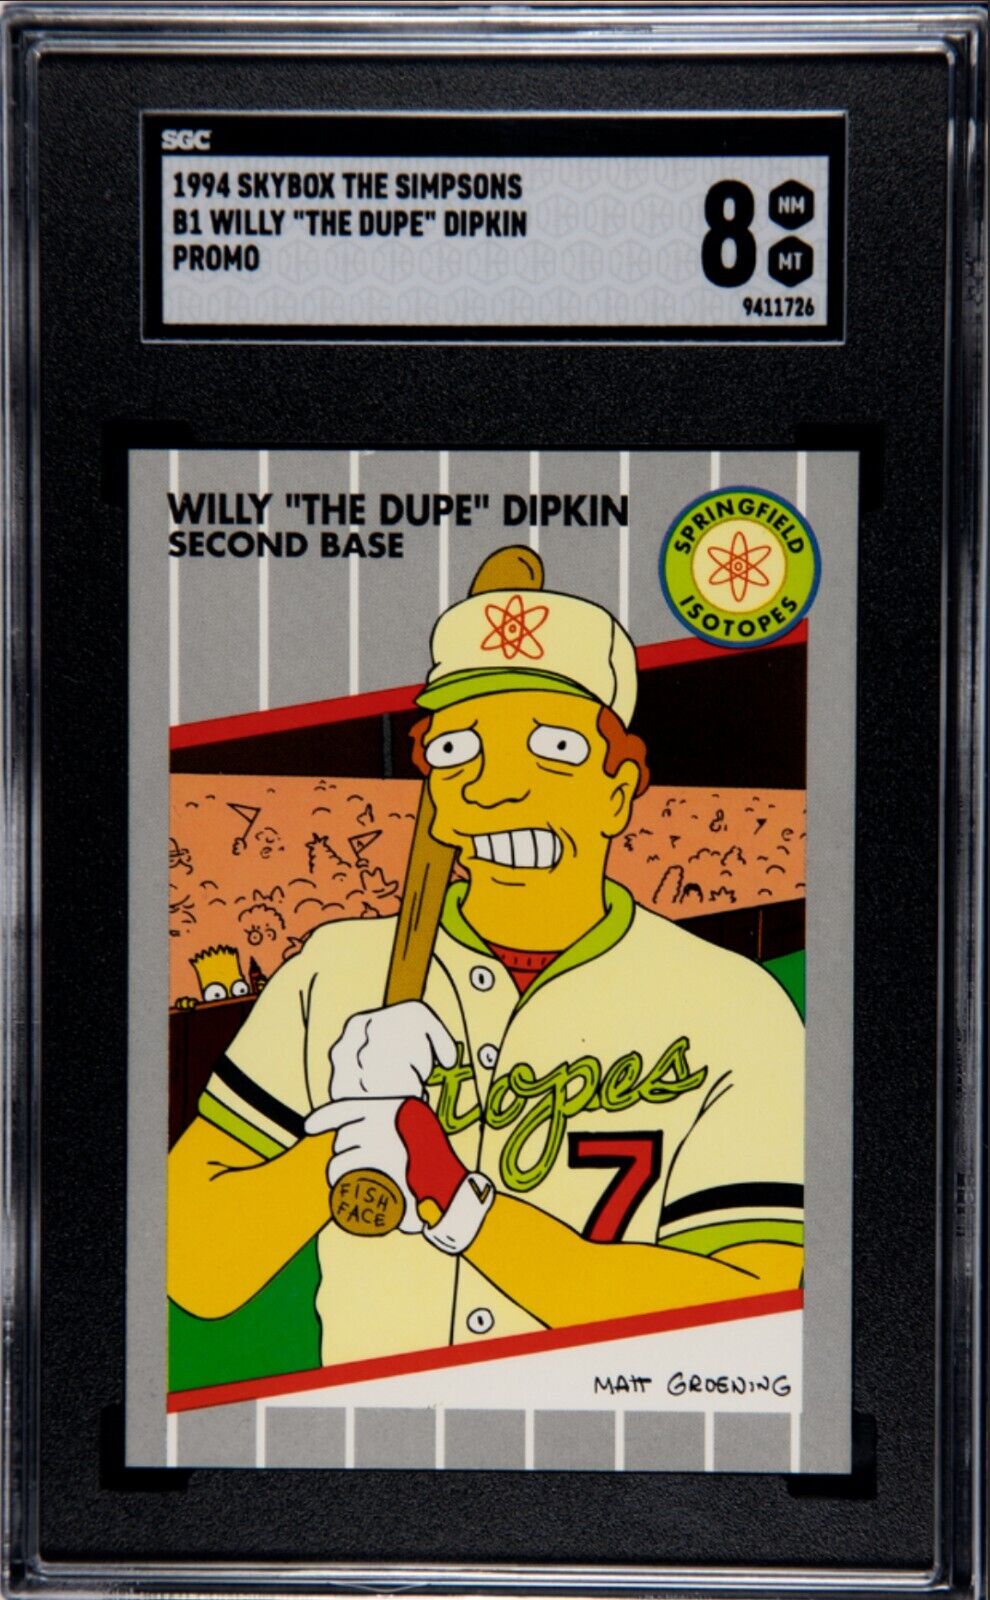 1994 Skybox The Simpsons Comic B1 Willy The Dupe Dipkin SGC 8 Promo Card